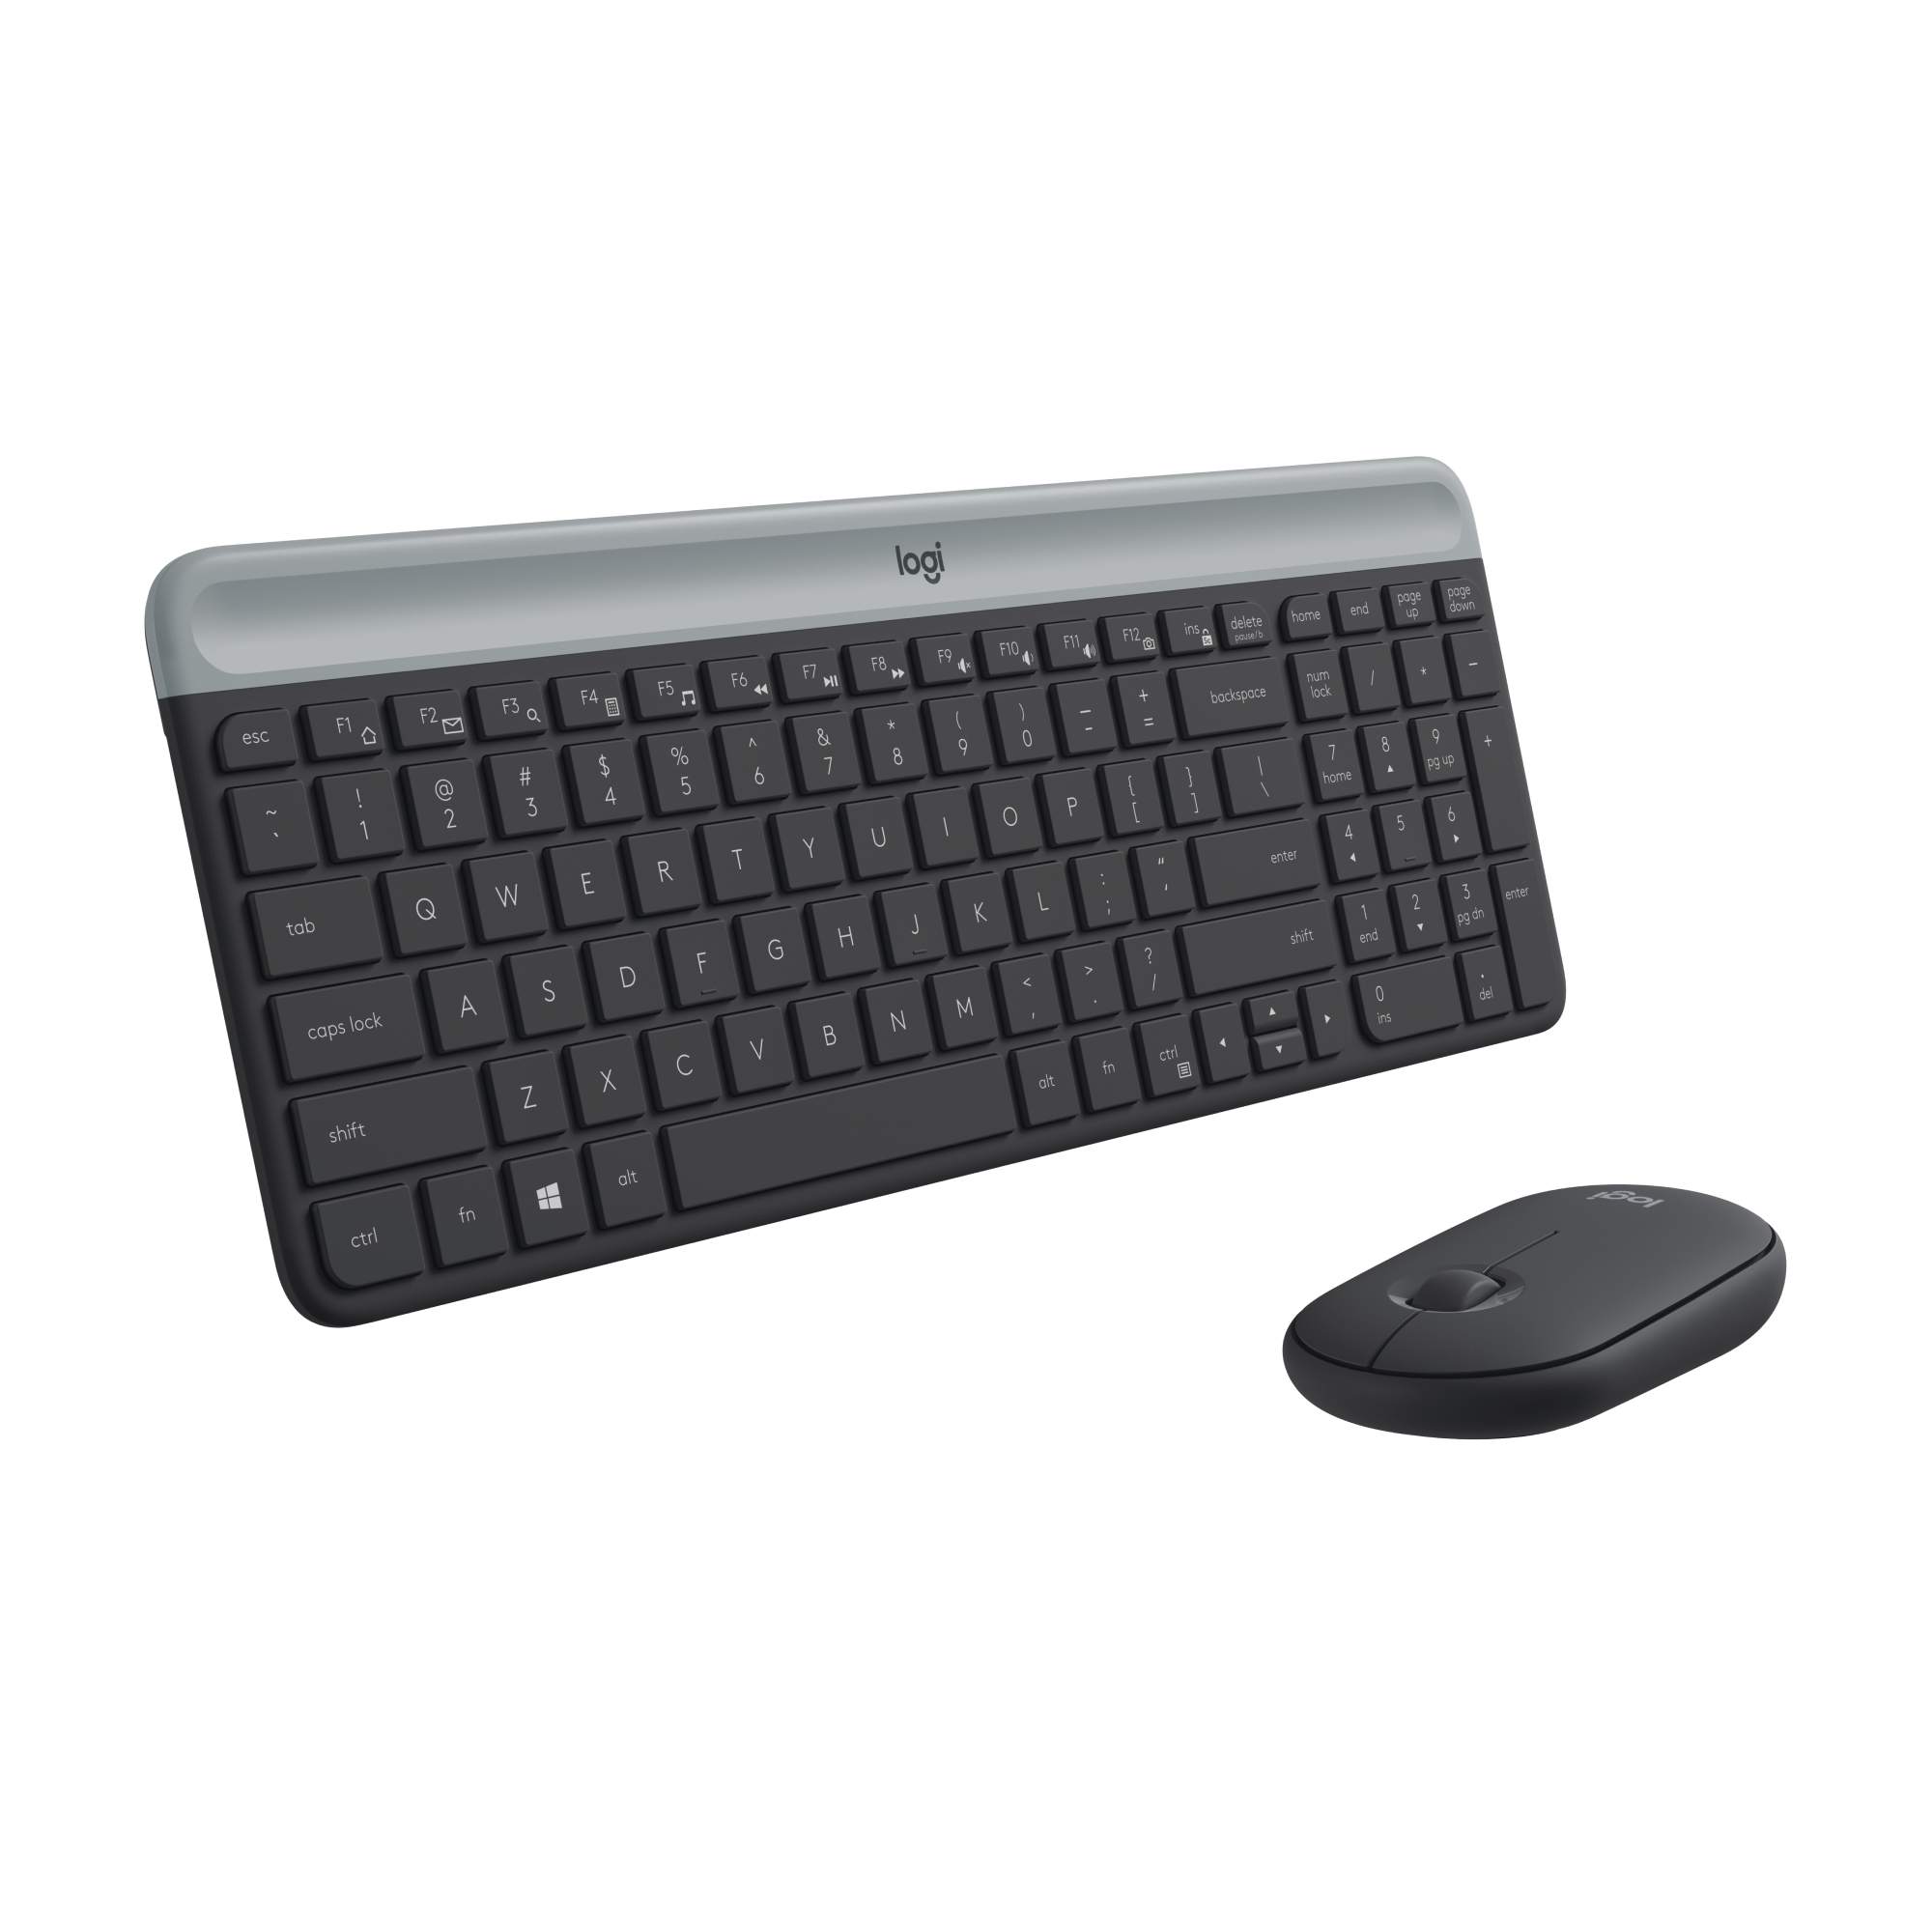 Logitech - MK470 Full-size Wireless Scissor Keyboard and Mouse Bundle with Plug and Play - Black/Gray